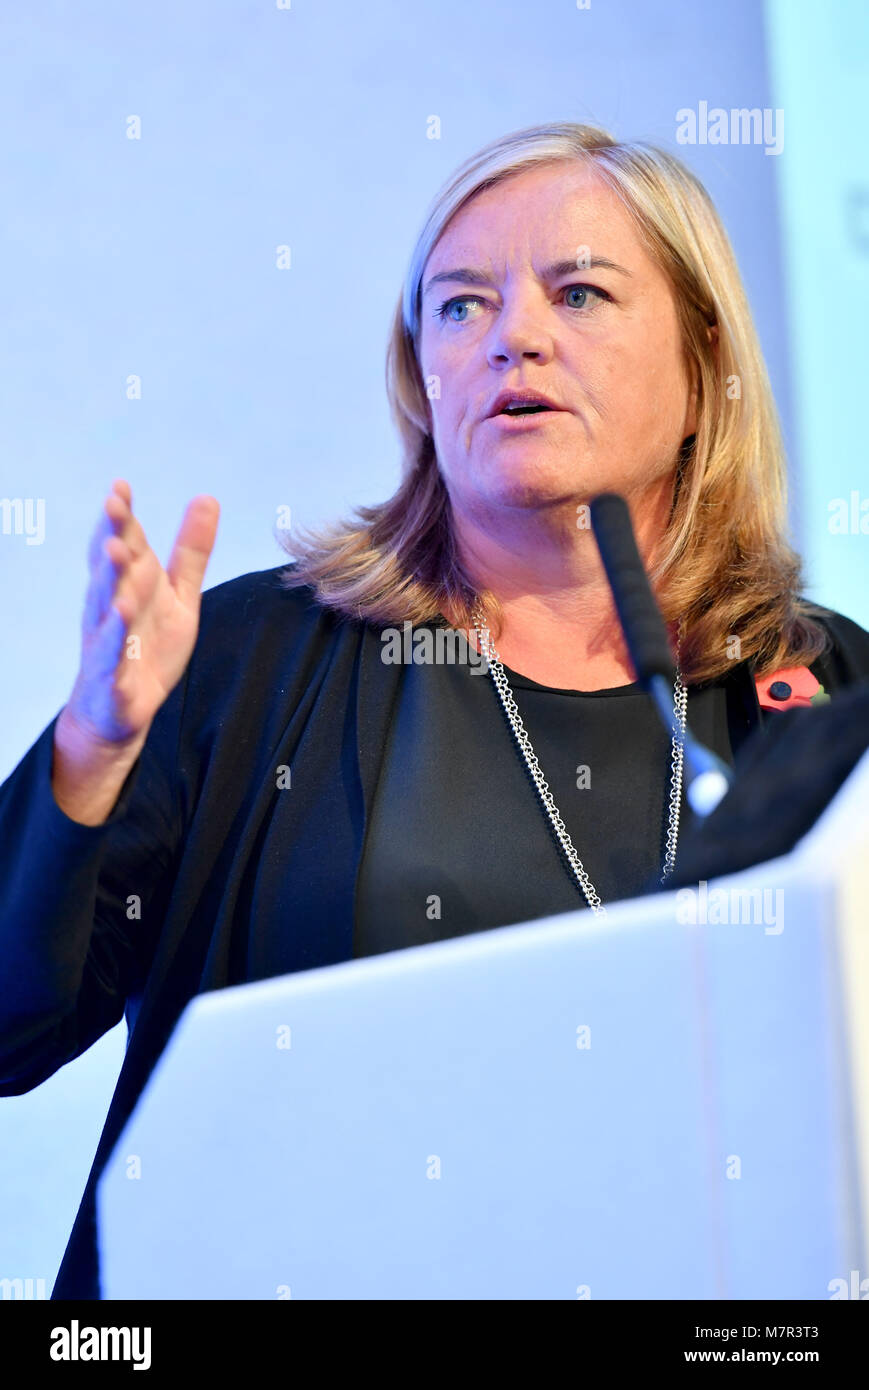 Dame Louise Casey author of the 2016 Casey Review into Social Integration & Opportunity, speaking at a conference in central London in 2017 Stock Photo